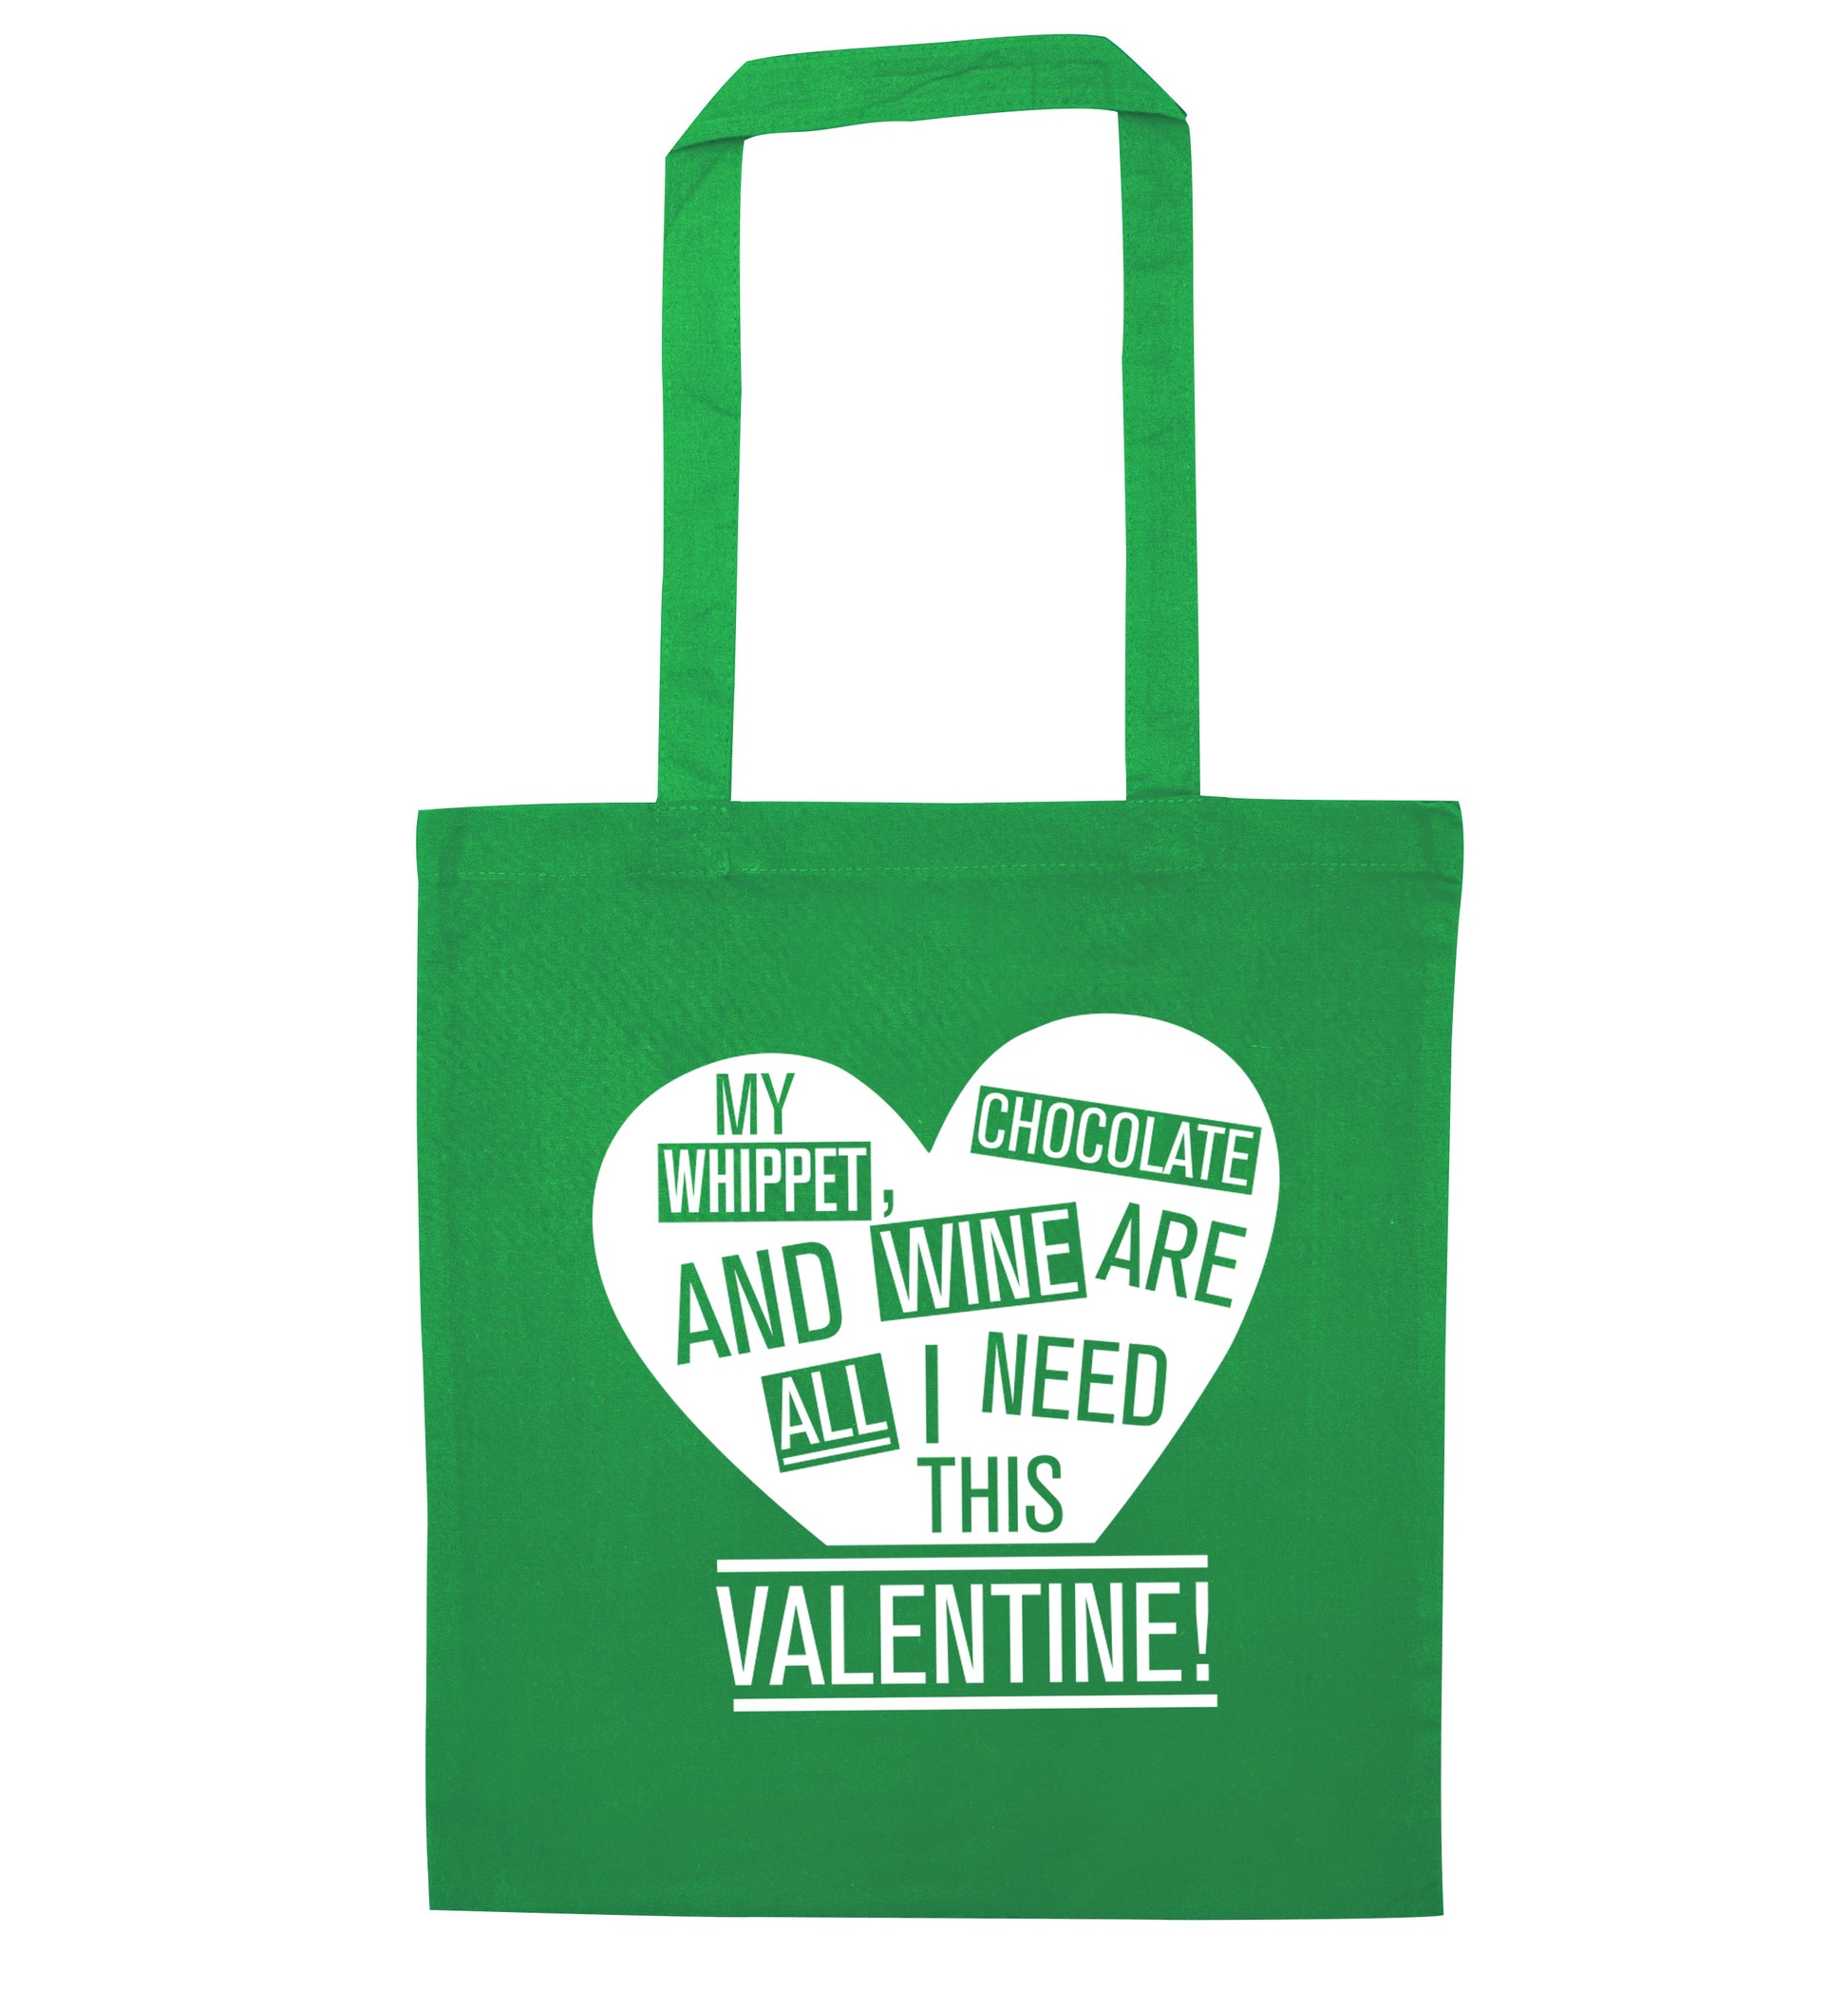 My whippet, chocolate and wine are all I need this valentine! green tote bag